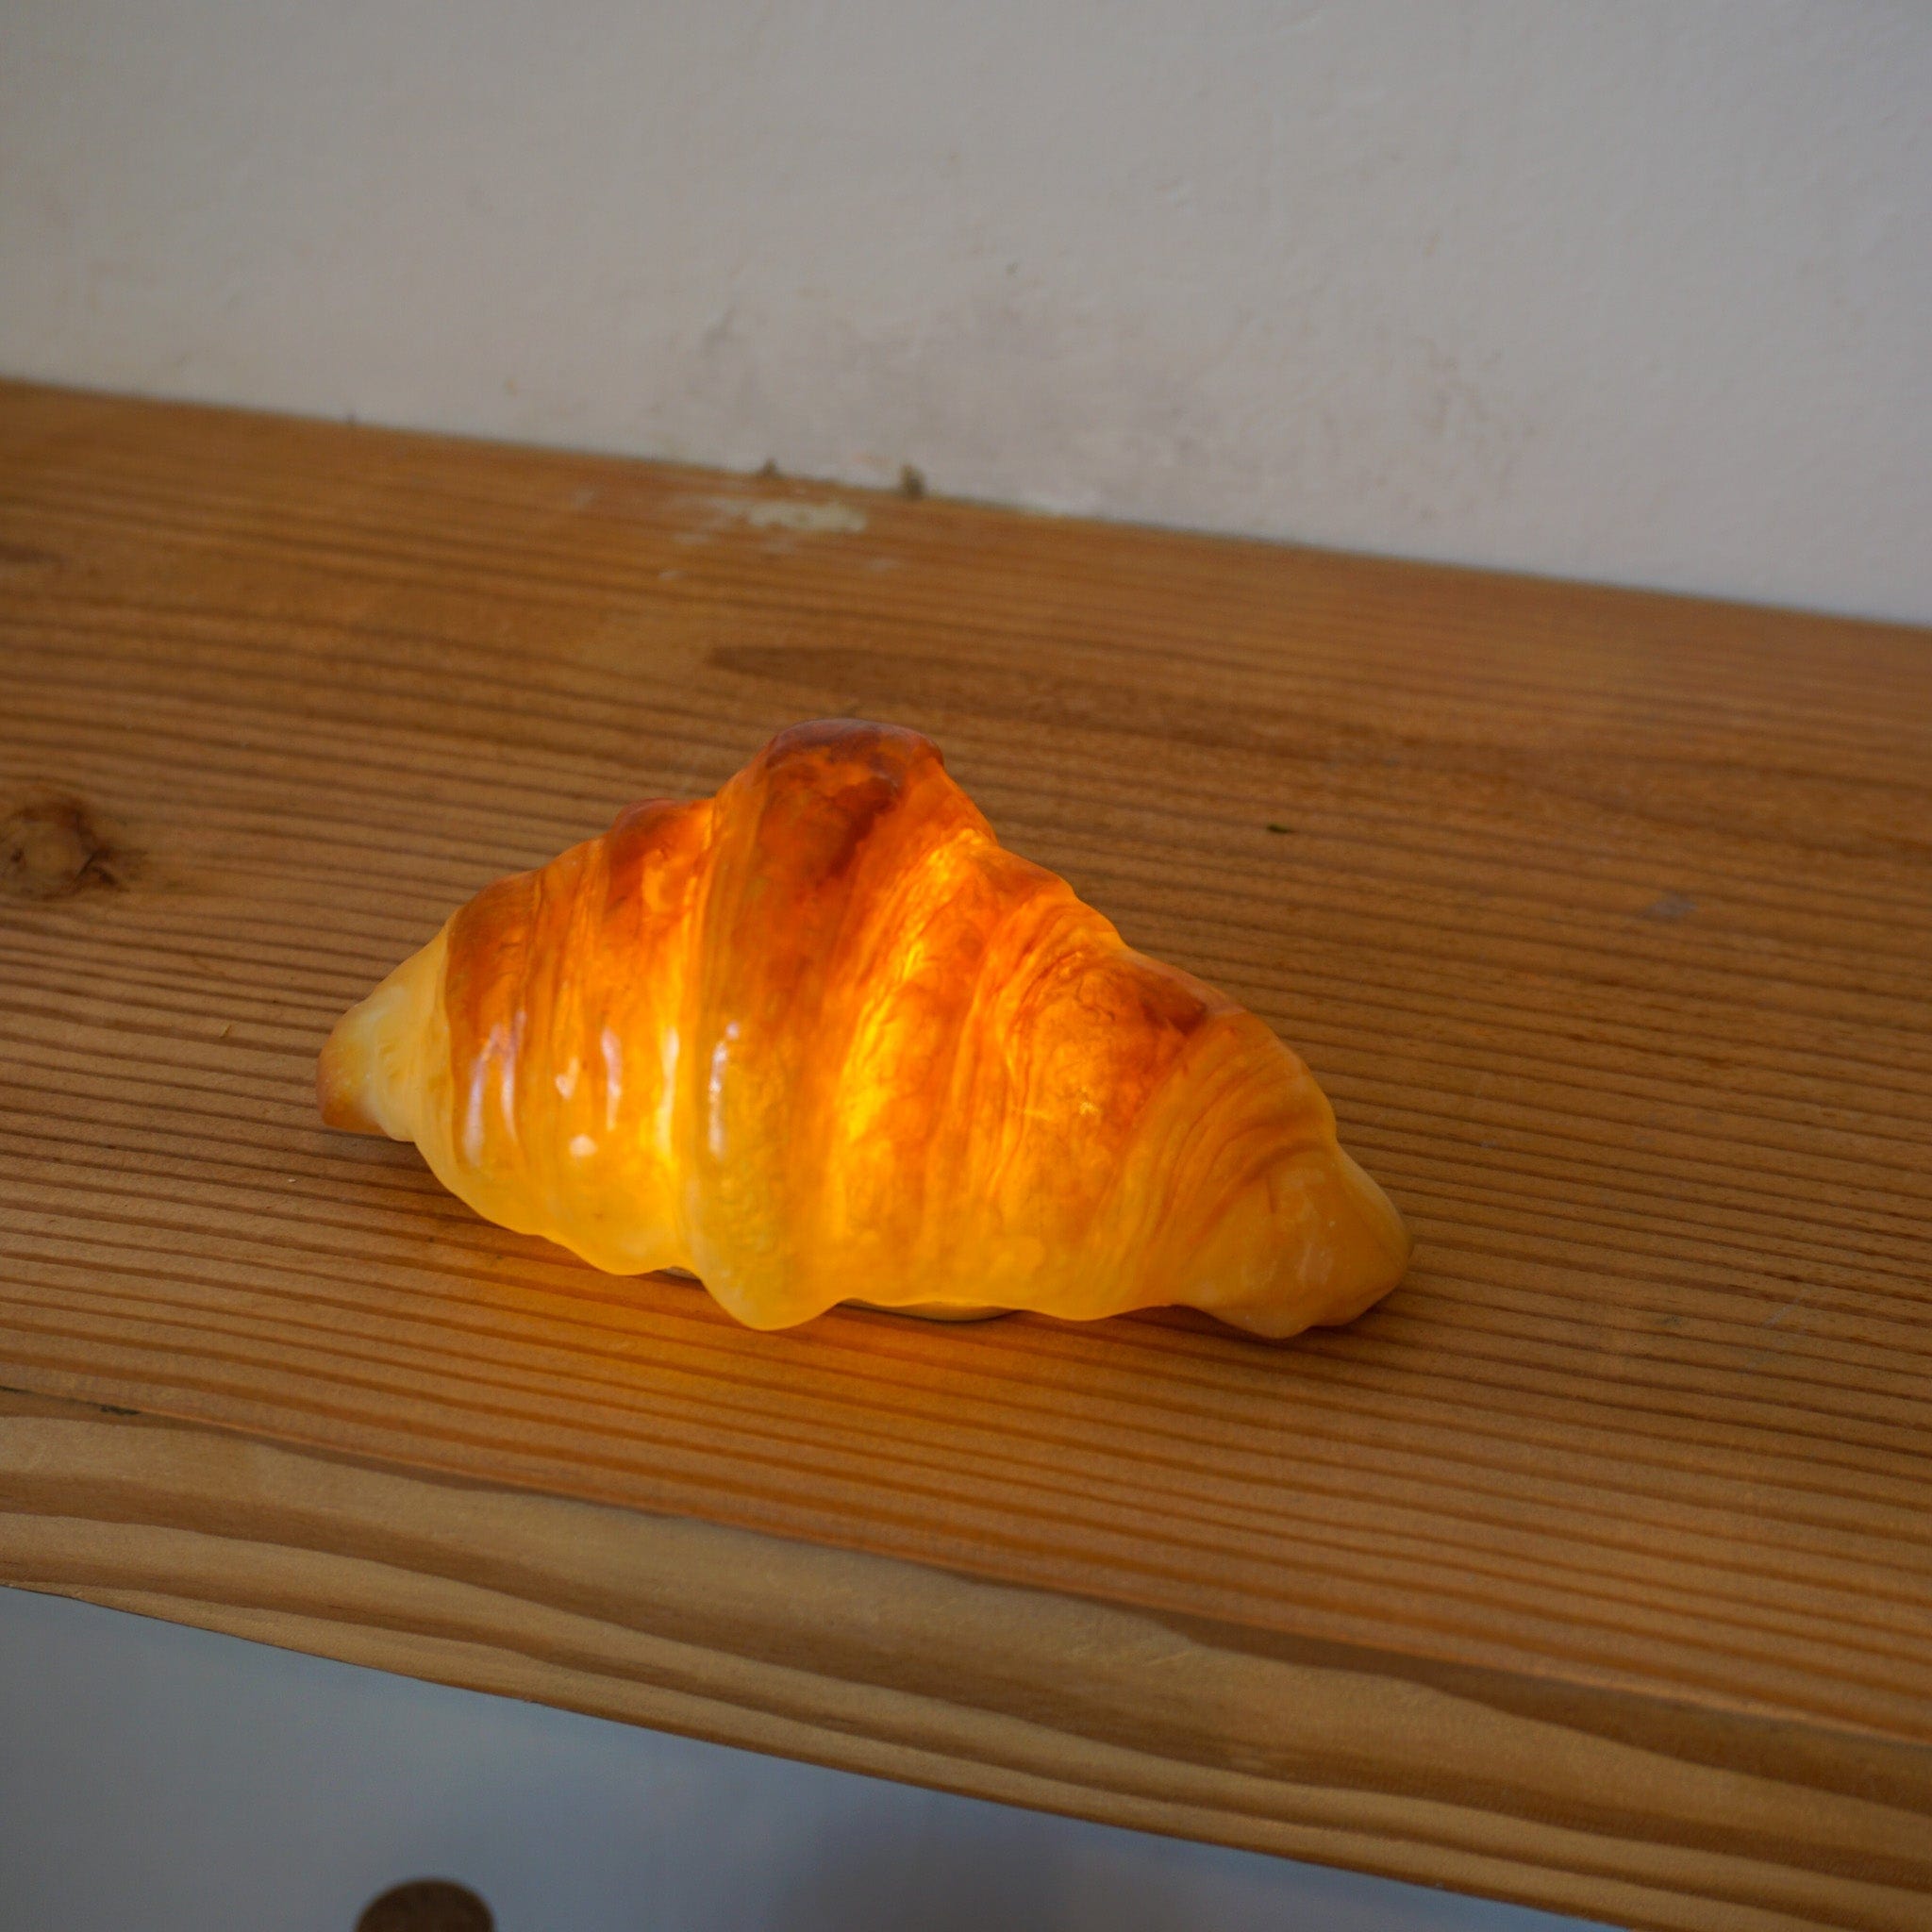 Pampshade "Real Bread" Lights Decor Croissant Bread Lamp